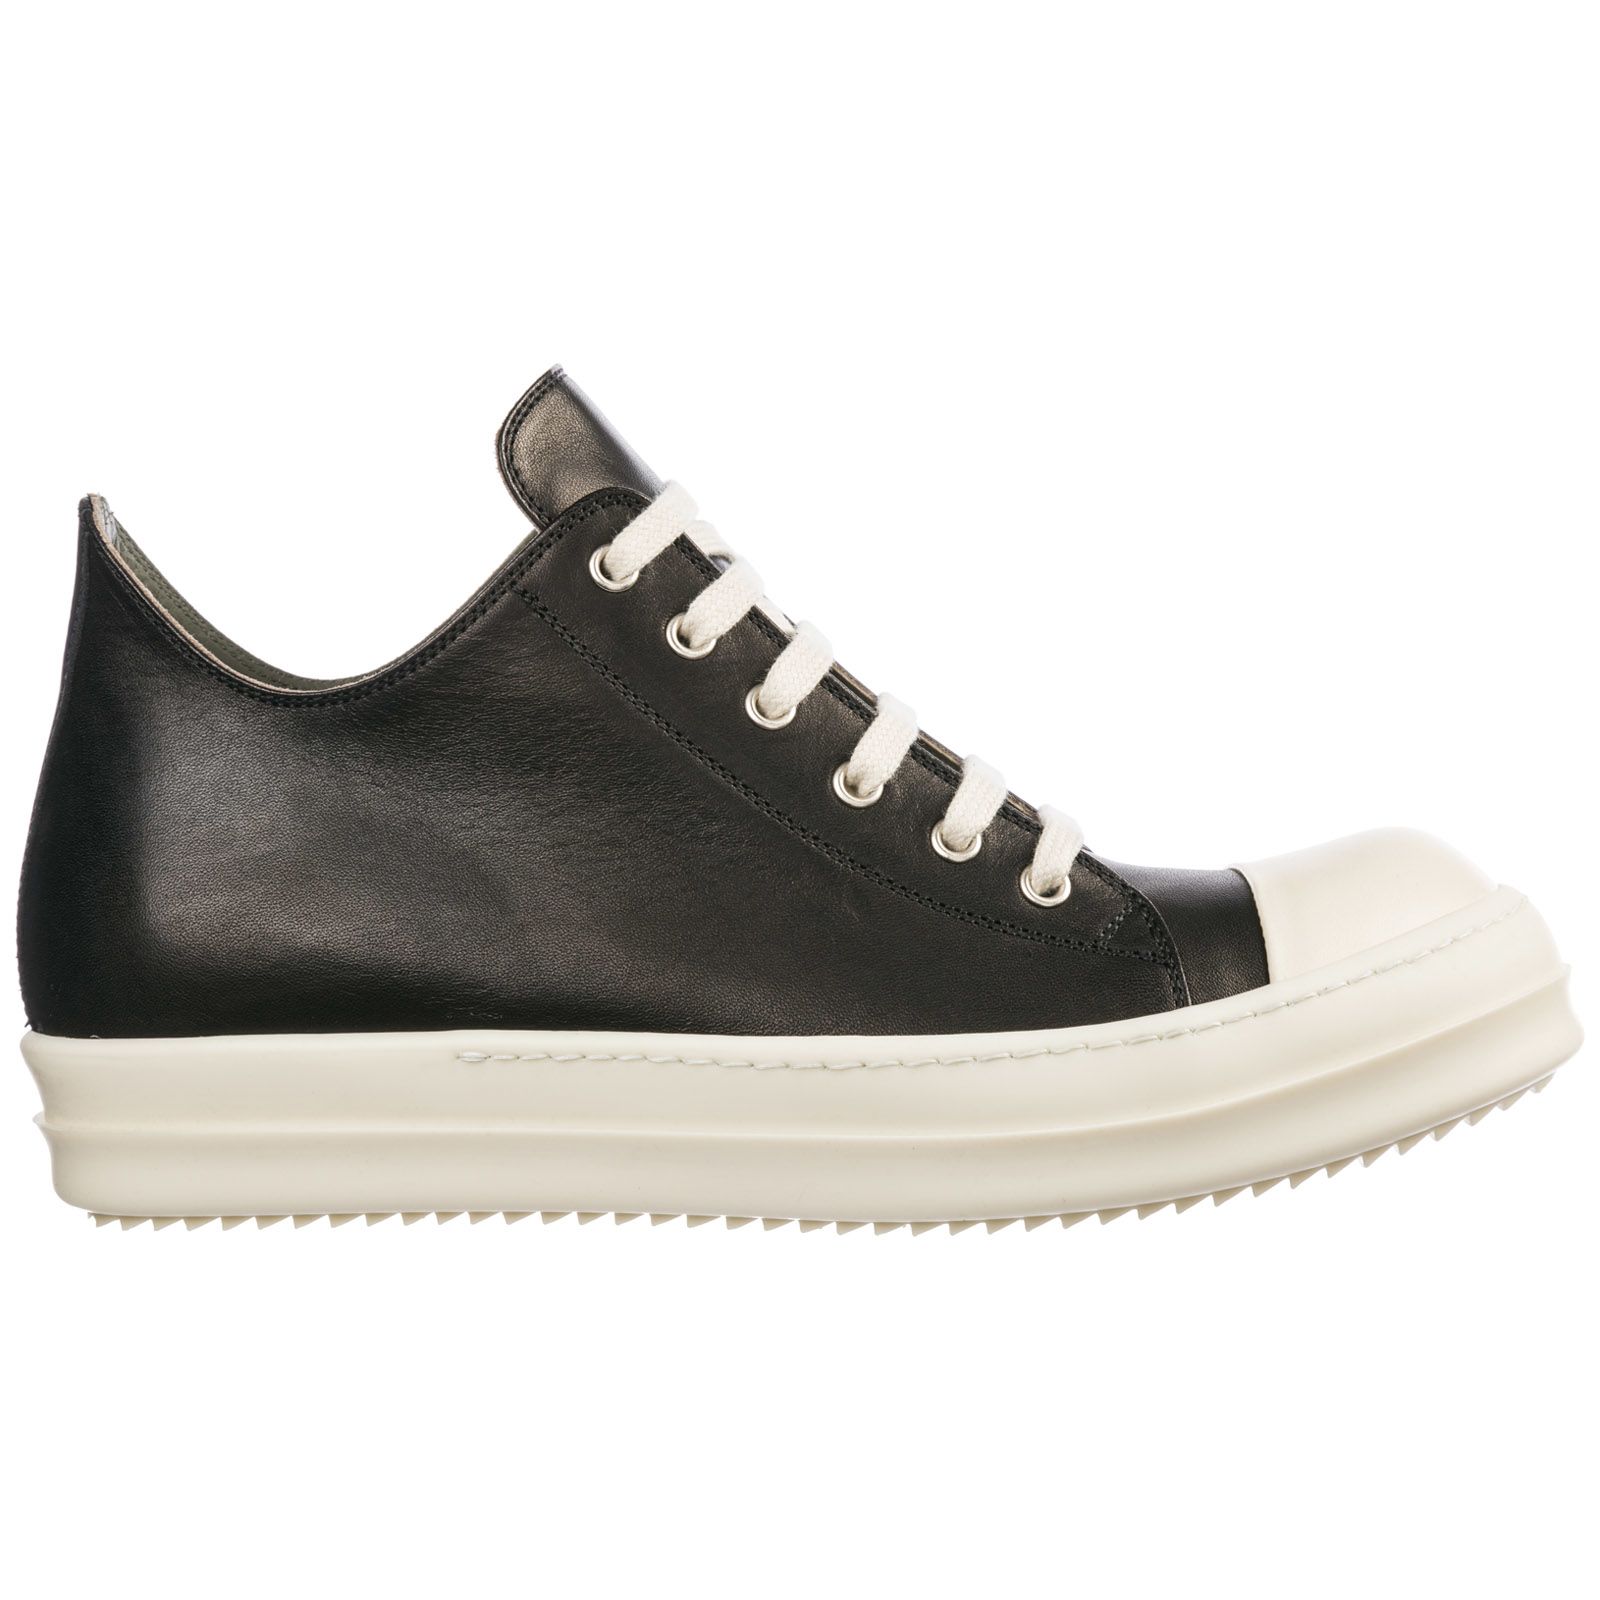 Rick Owens Rick Owens Shoes Leather Trainers Sneakers - Basic ...